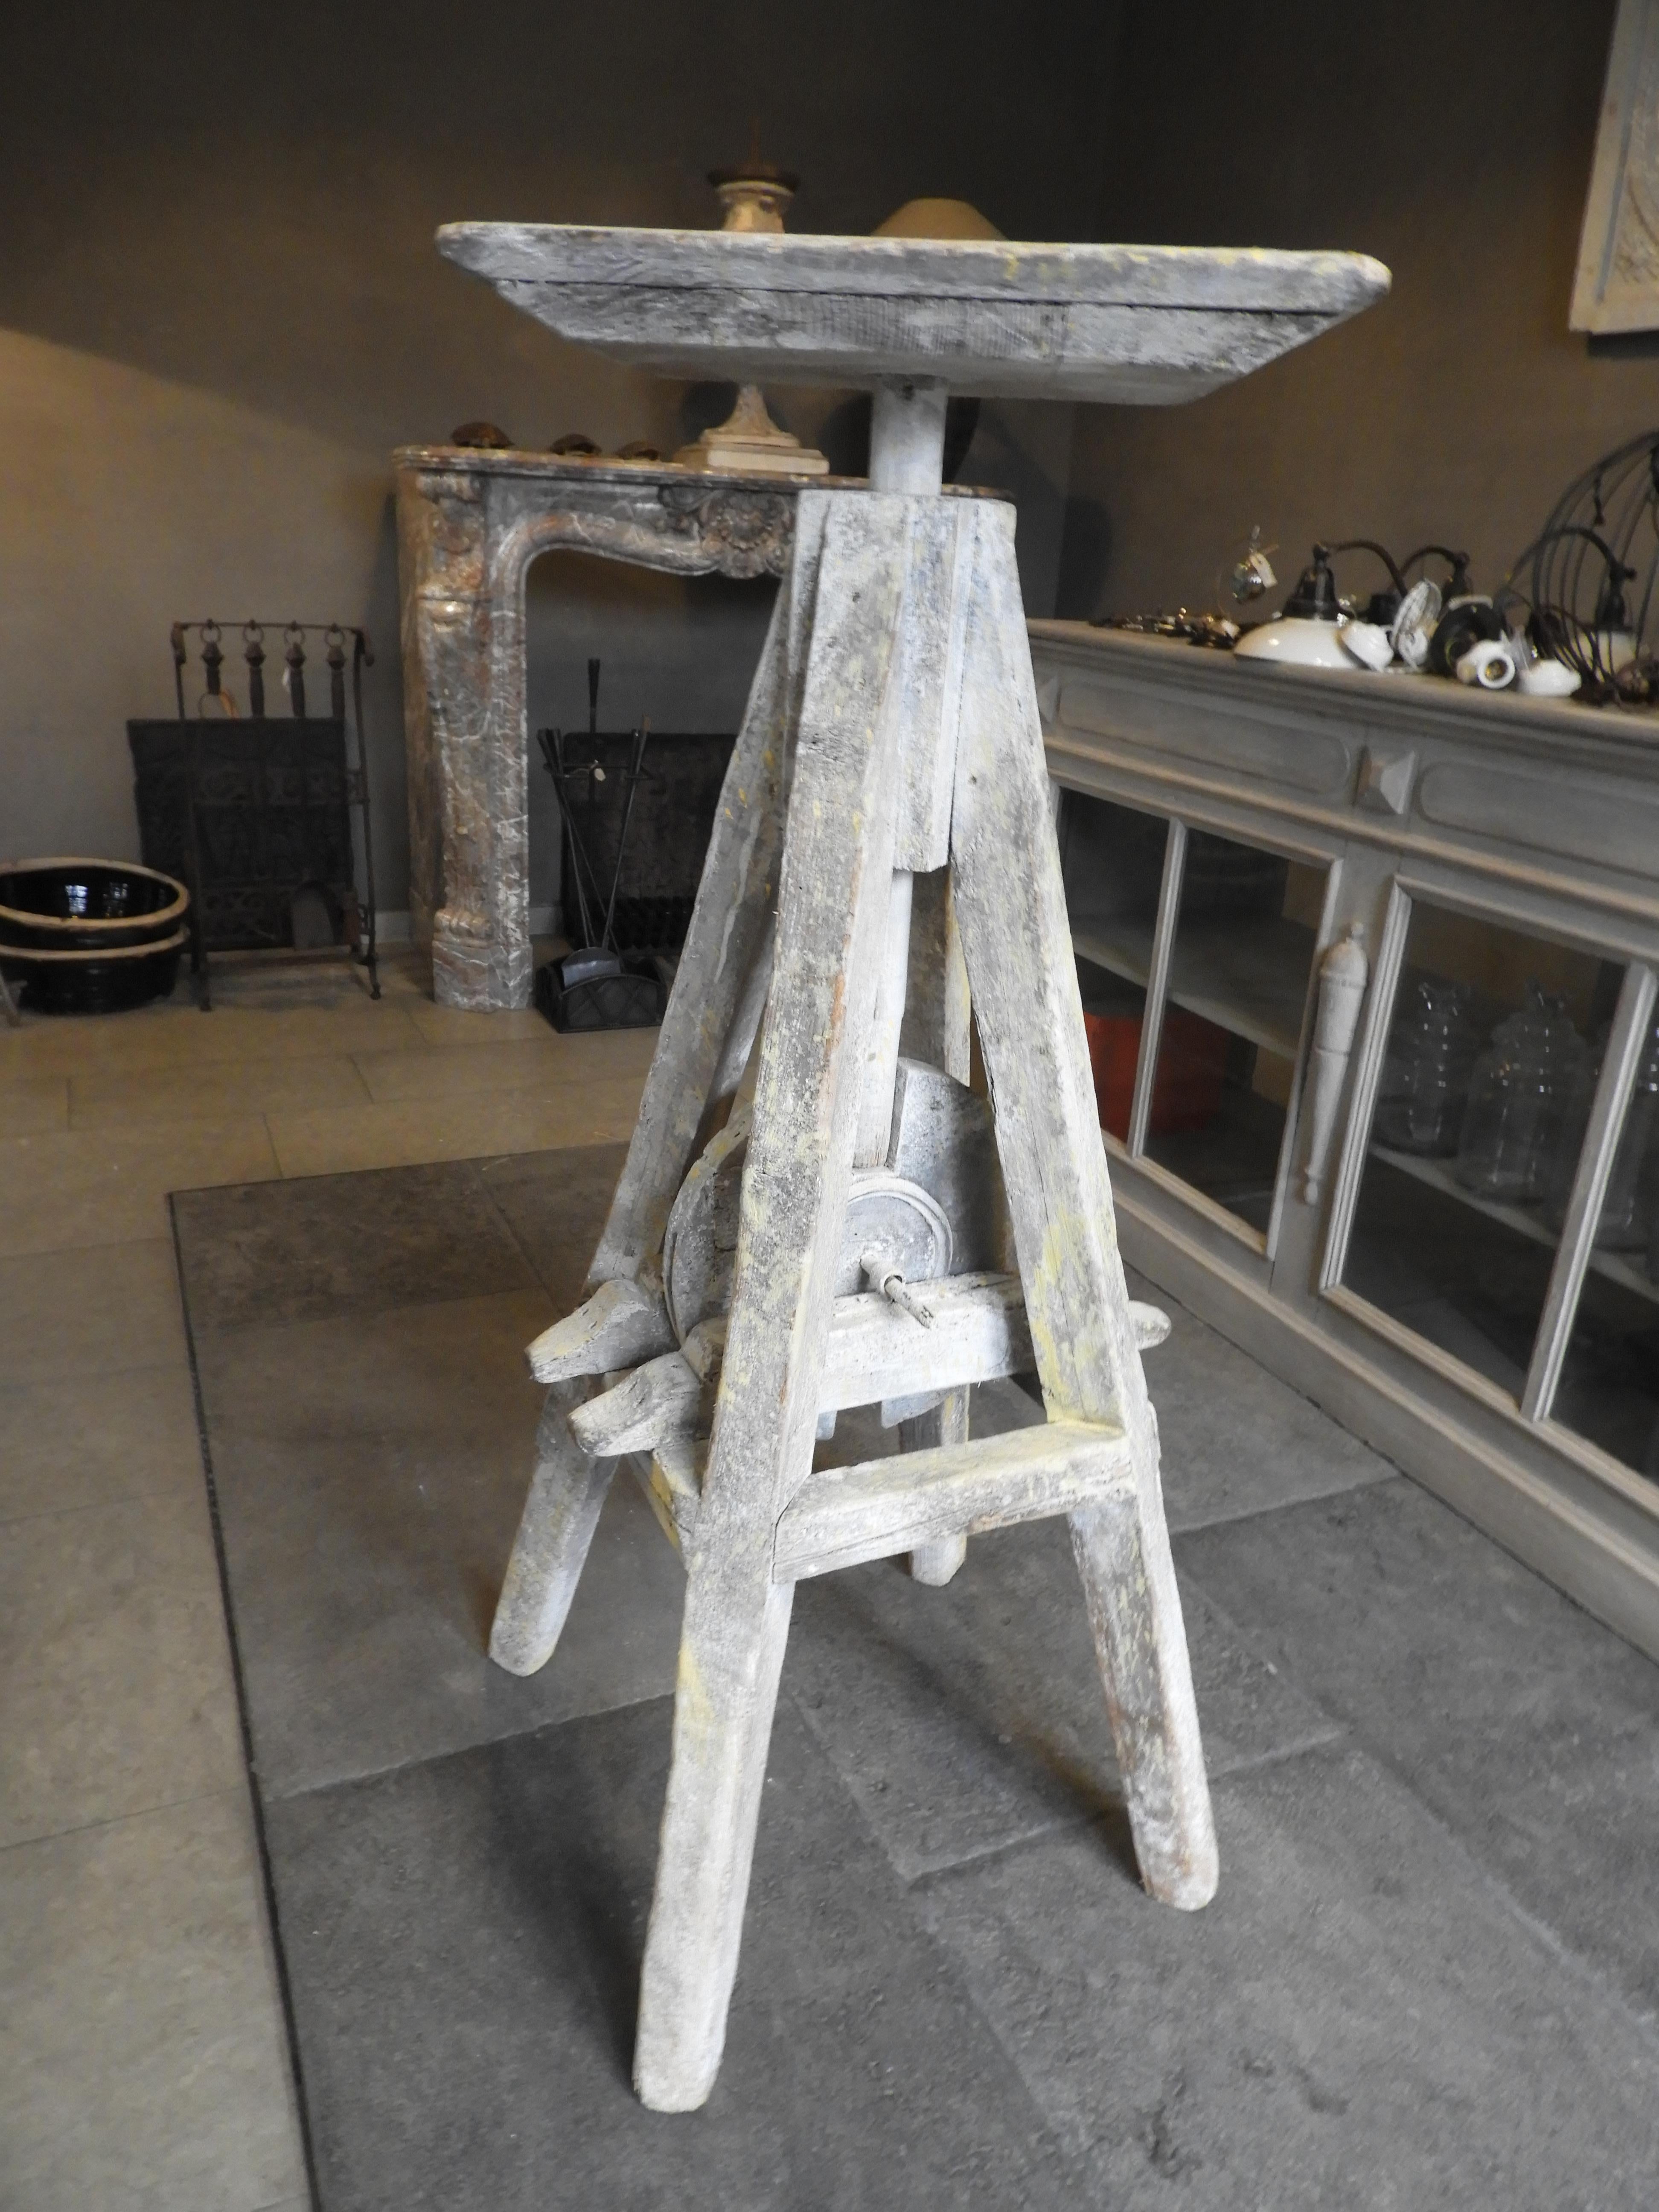 20th century turnable and in height adjustable sculptures working table in its original warn patina.